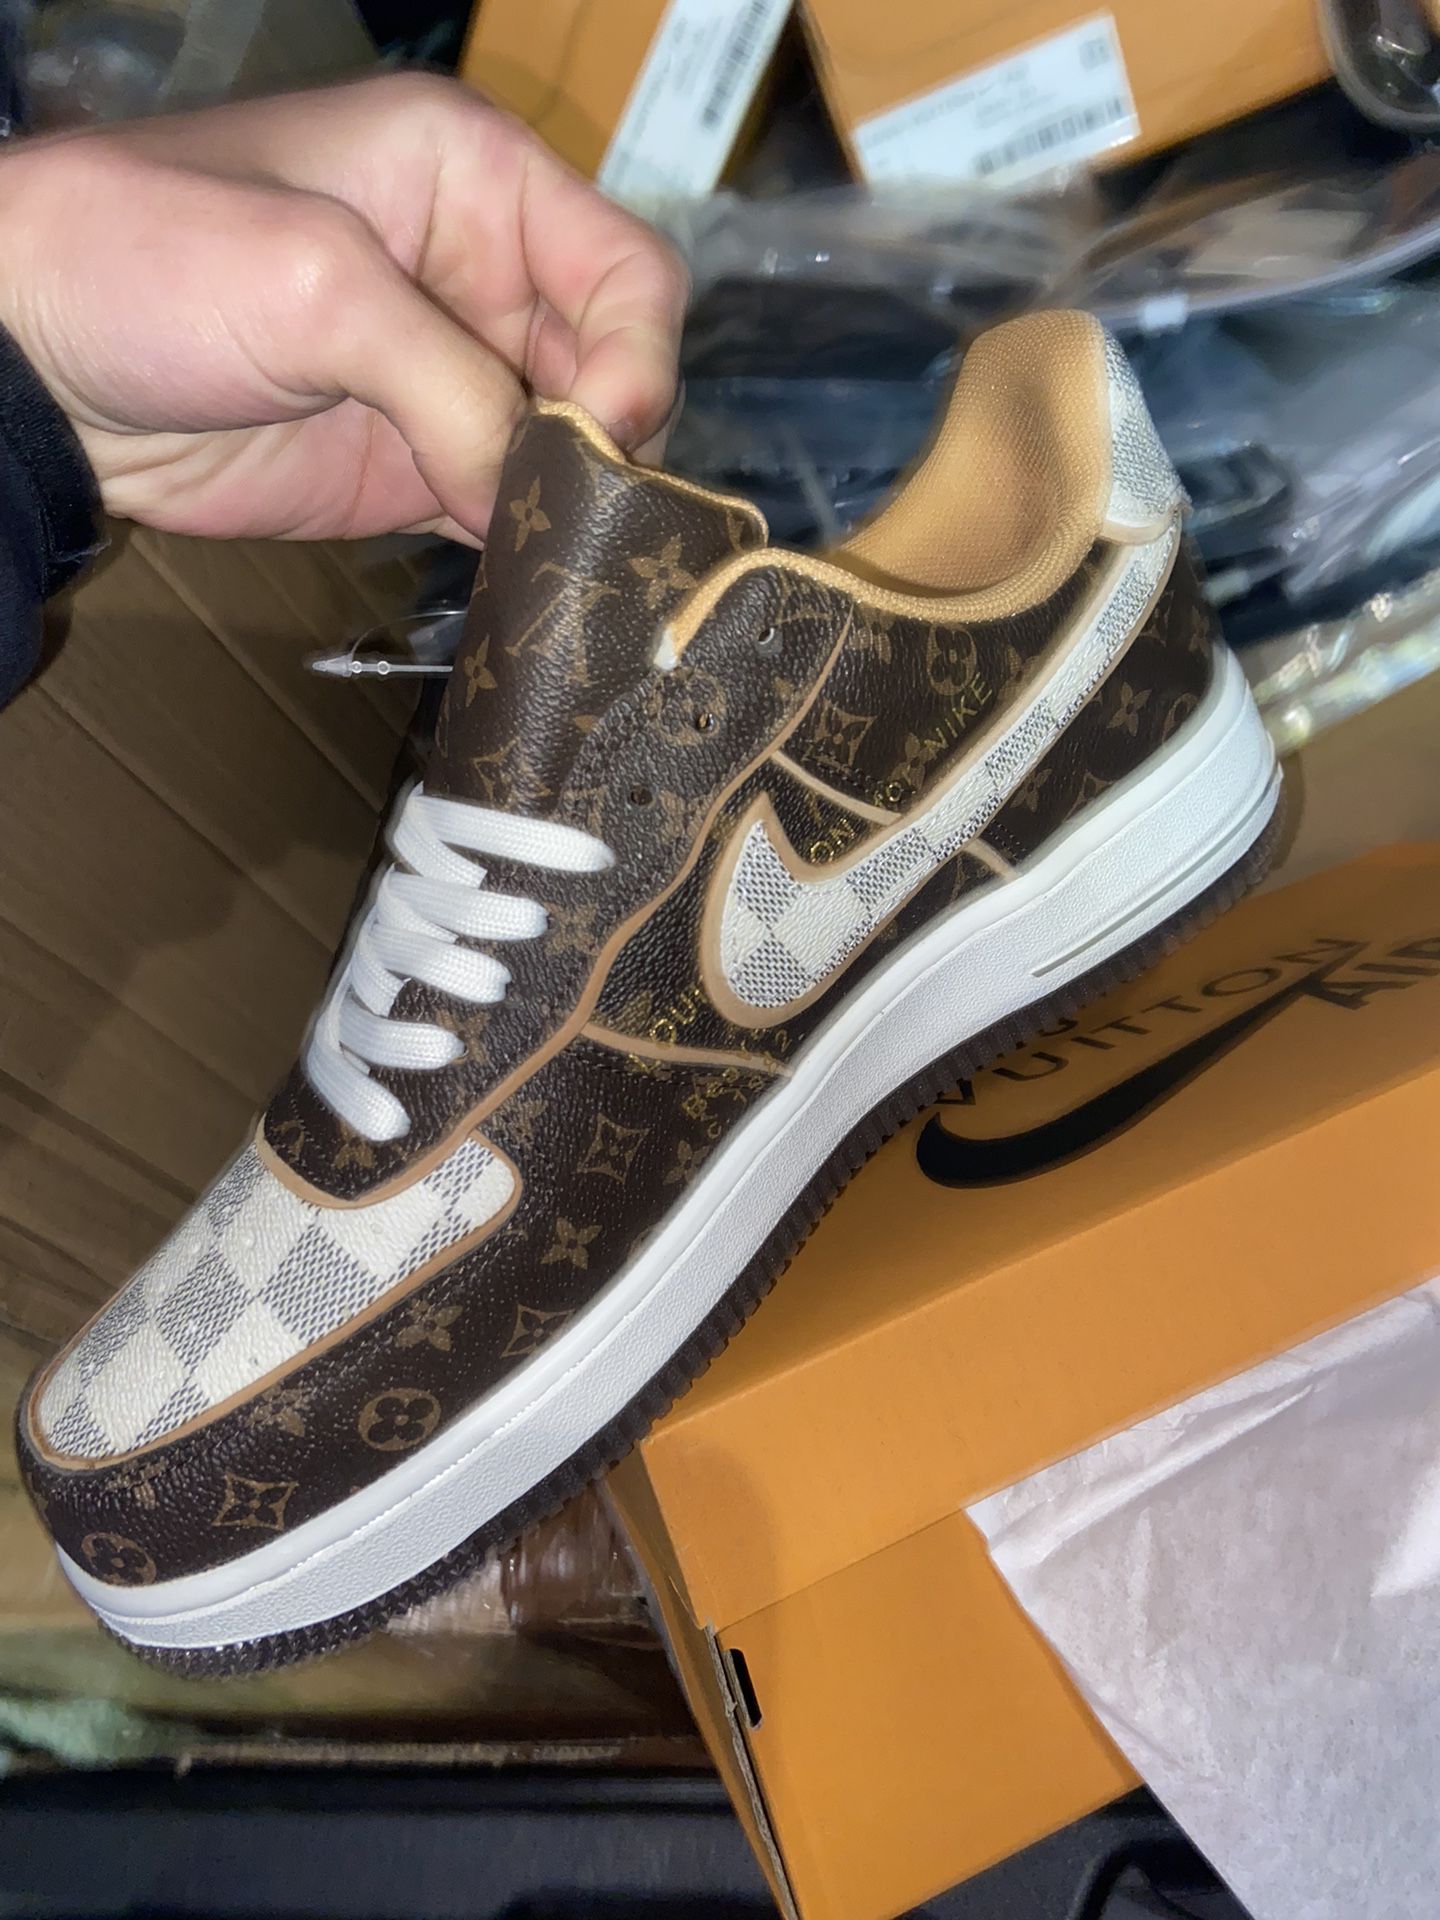 Louis Vuitton Nike LV Air Force 1 Low Available for Sale in Brooklyn, NY -  OfferUp